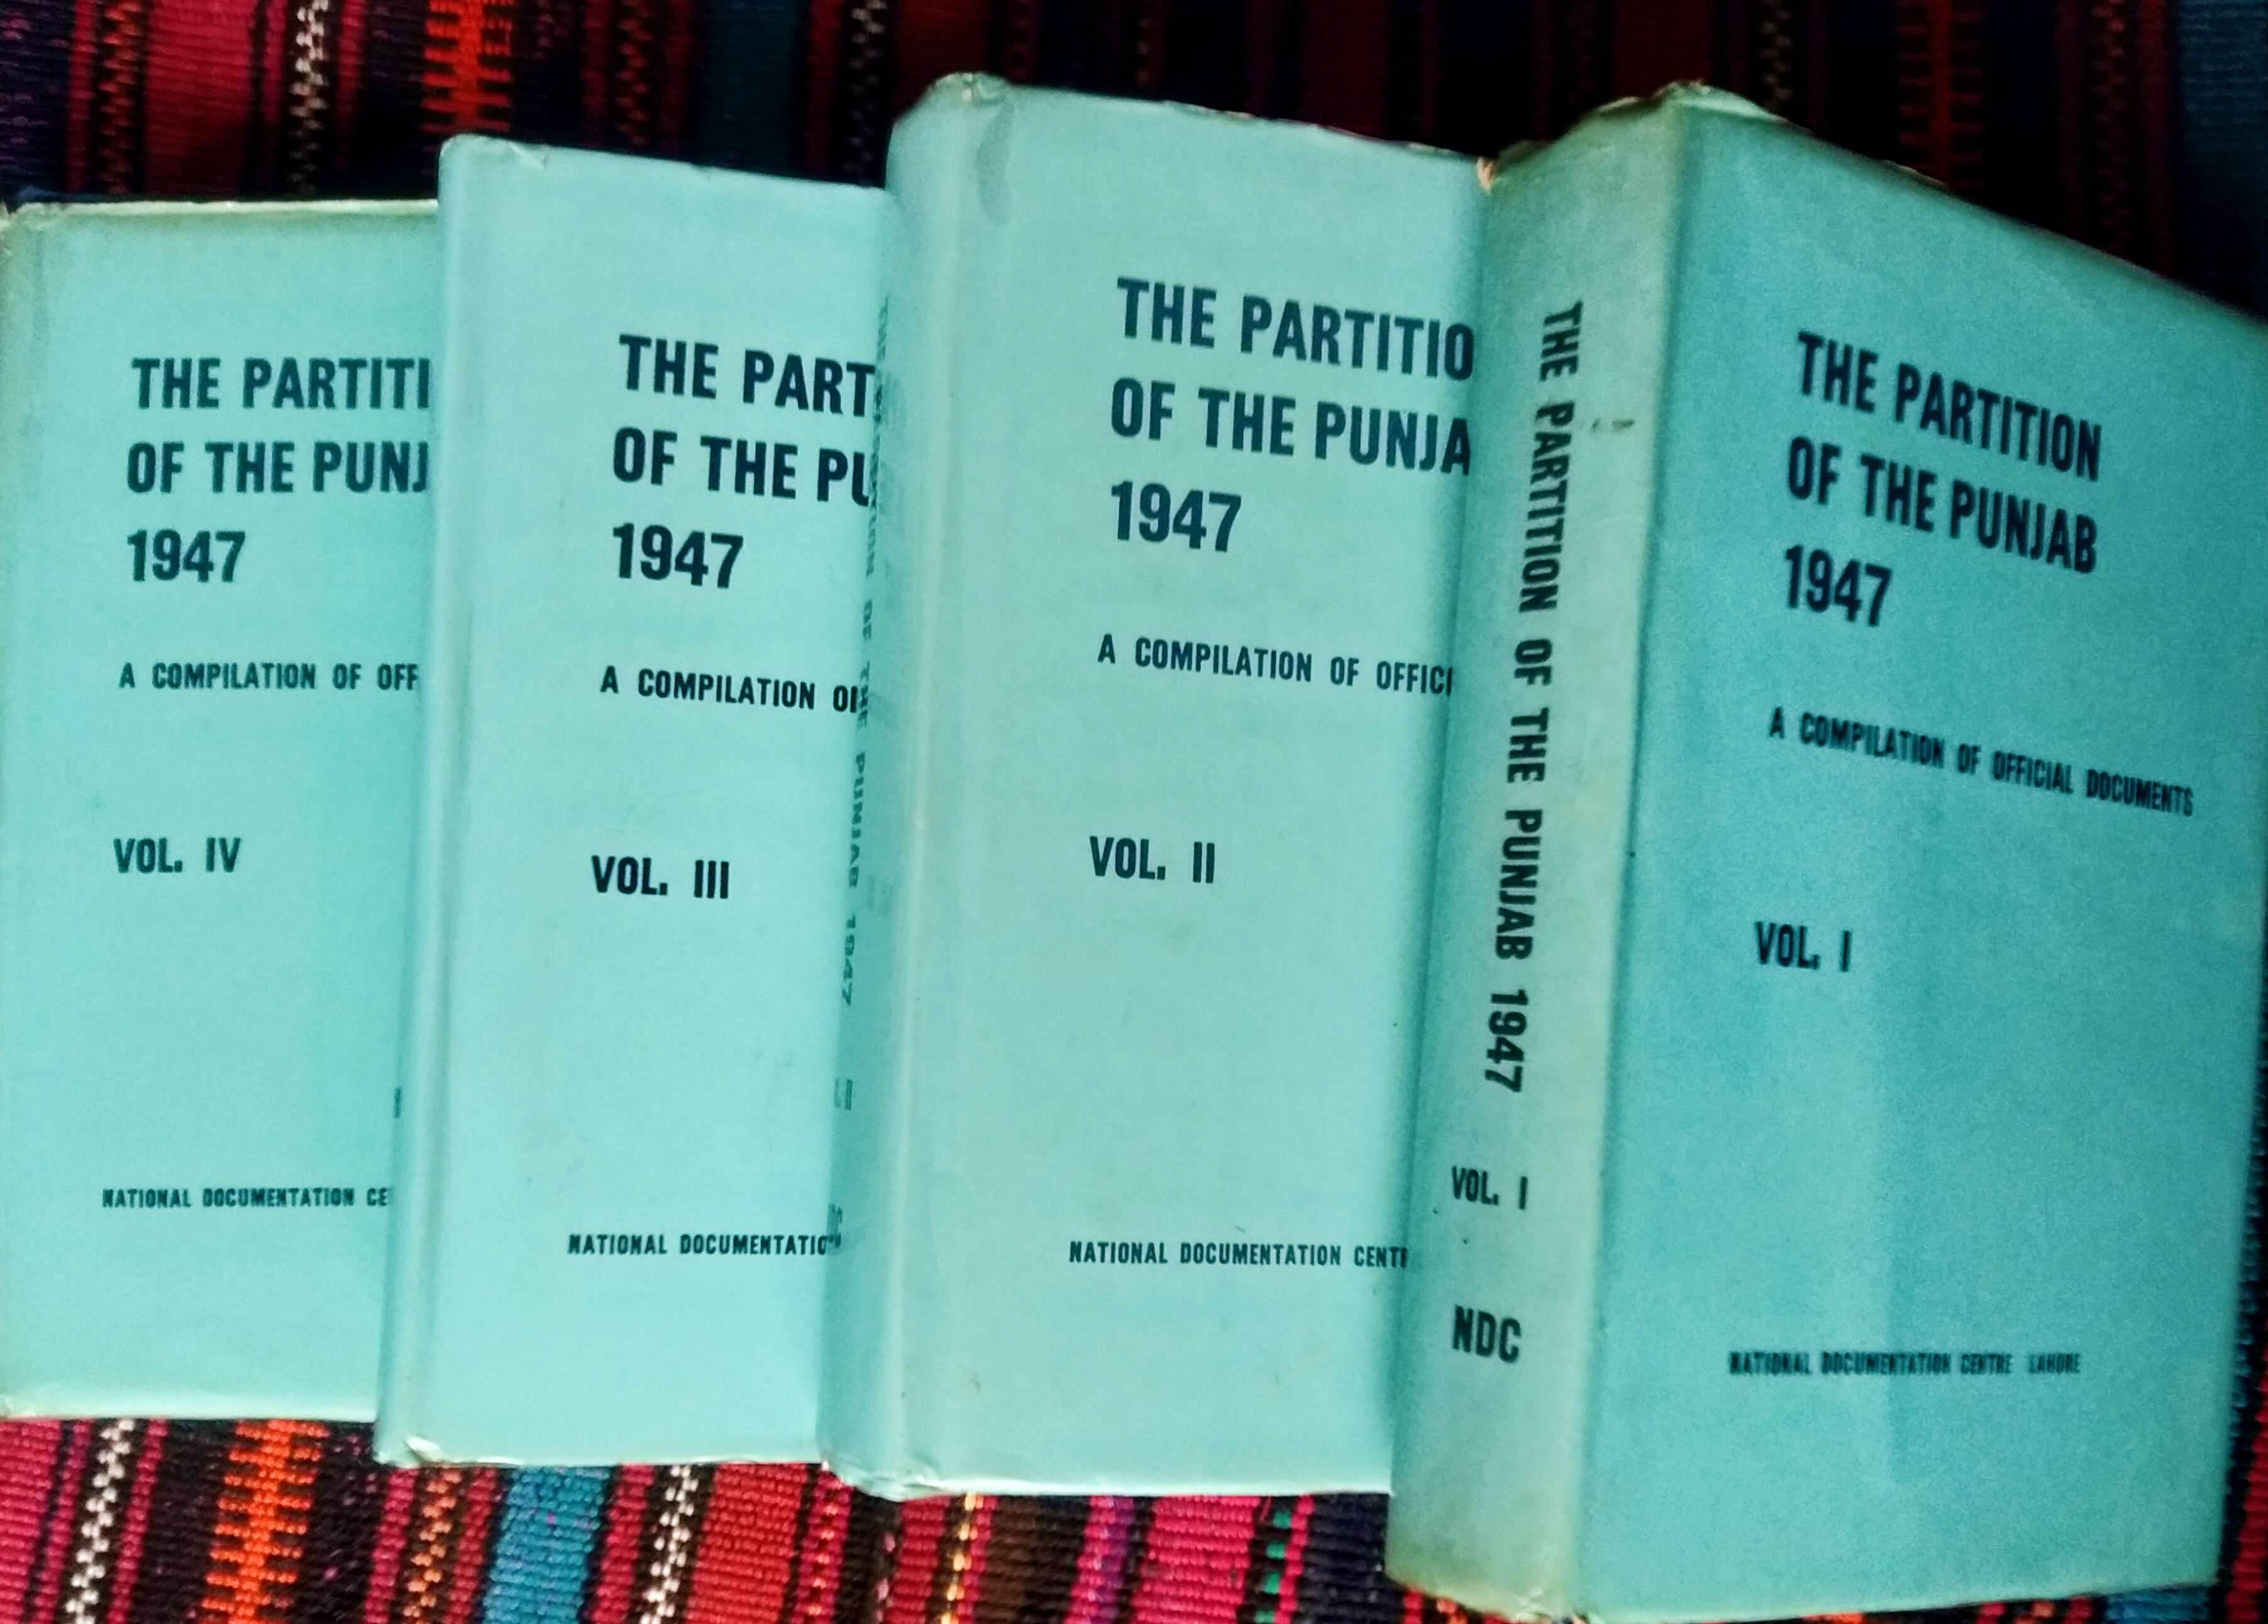 the partition of the punjab 1947:a compilation of official documents